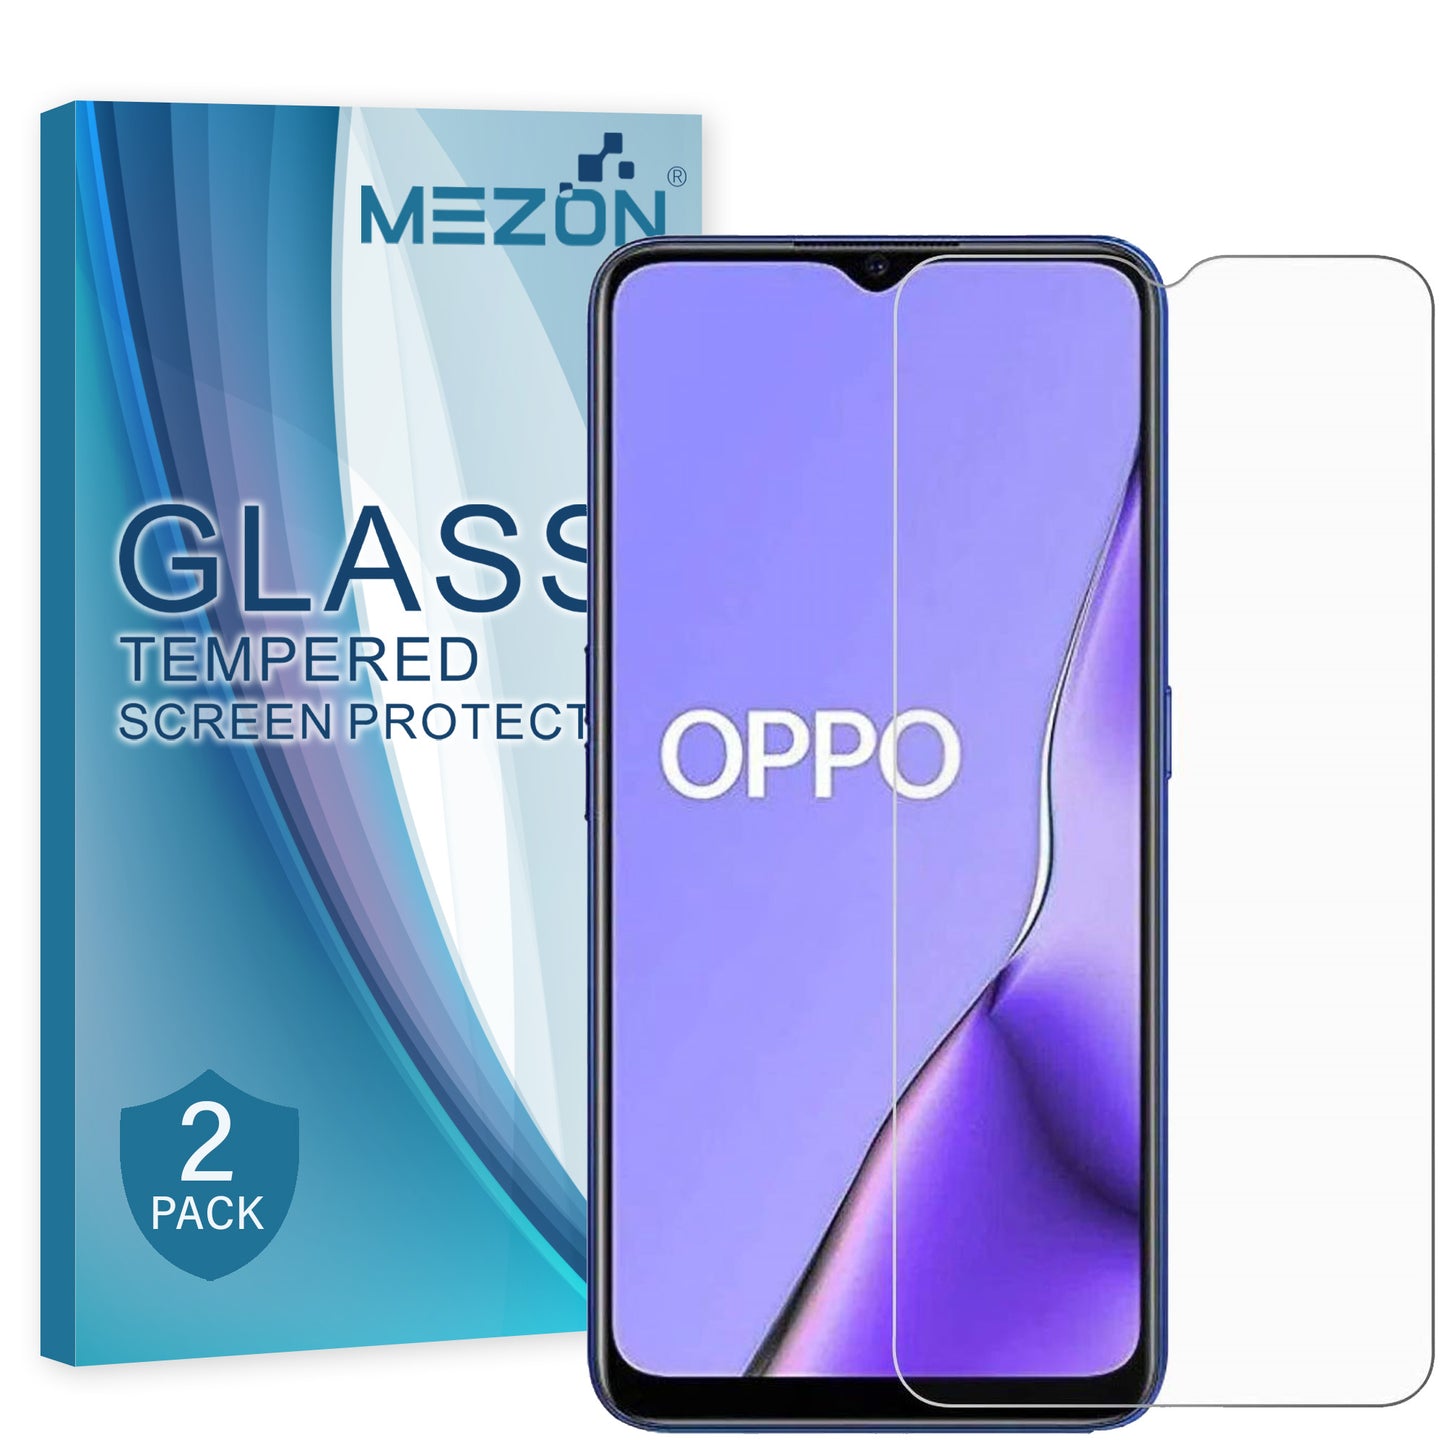 [2 Pack] MEZON OPPO A5 2020 Tempered Glass 9H HD Crystal Clear Premium Case Friendly Screen Protector (A5 2020, 9H)